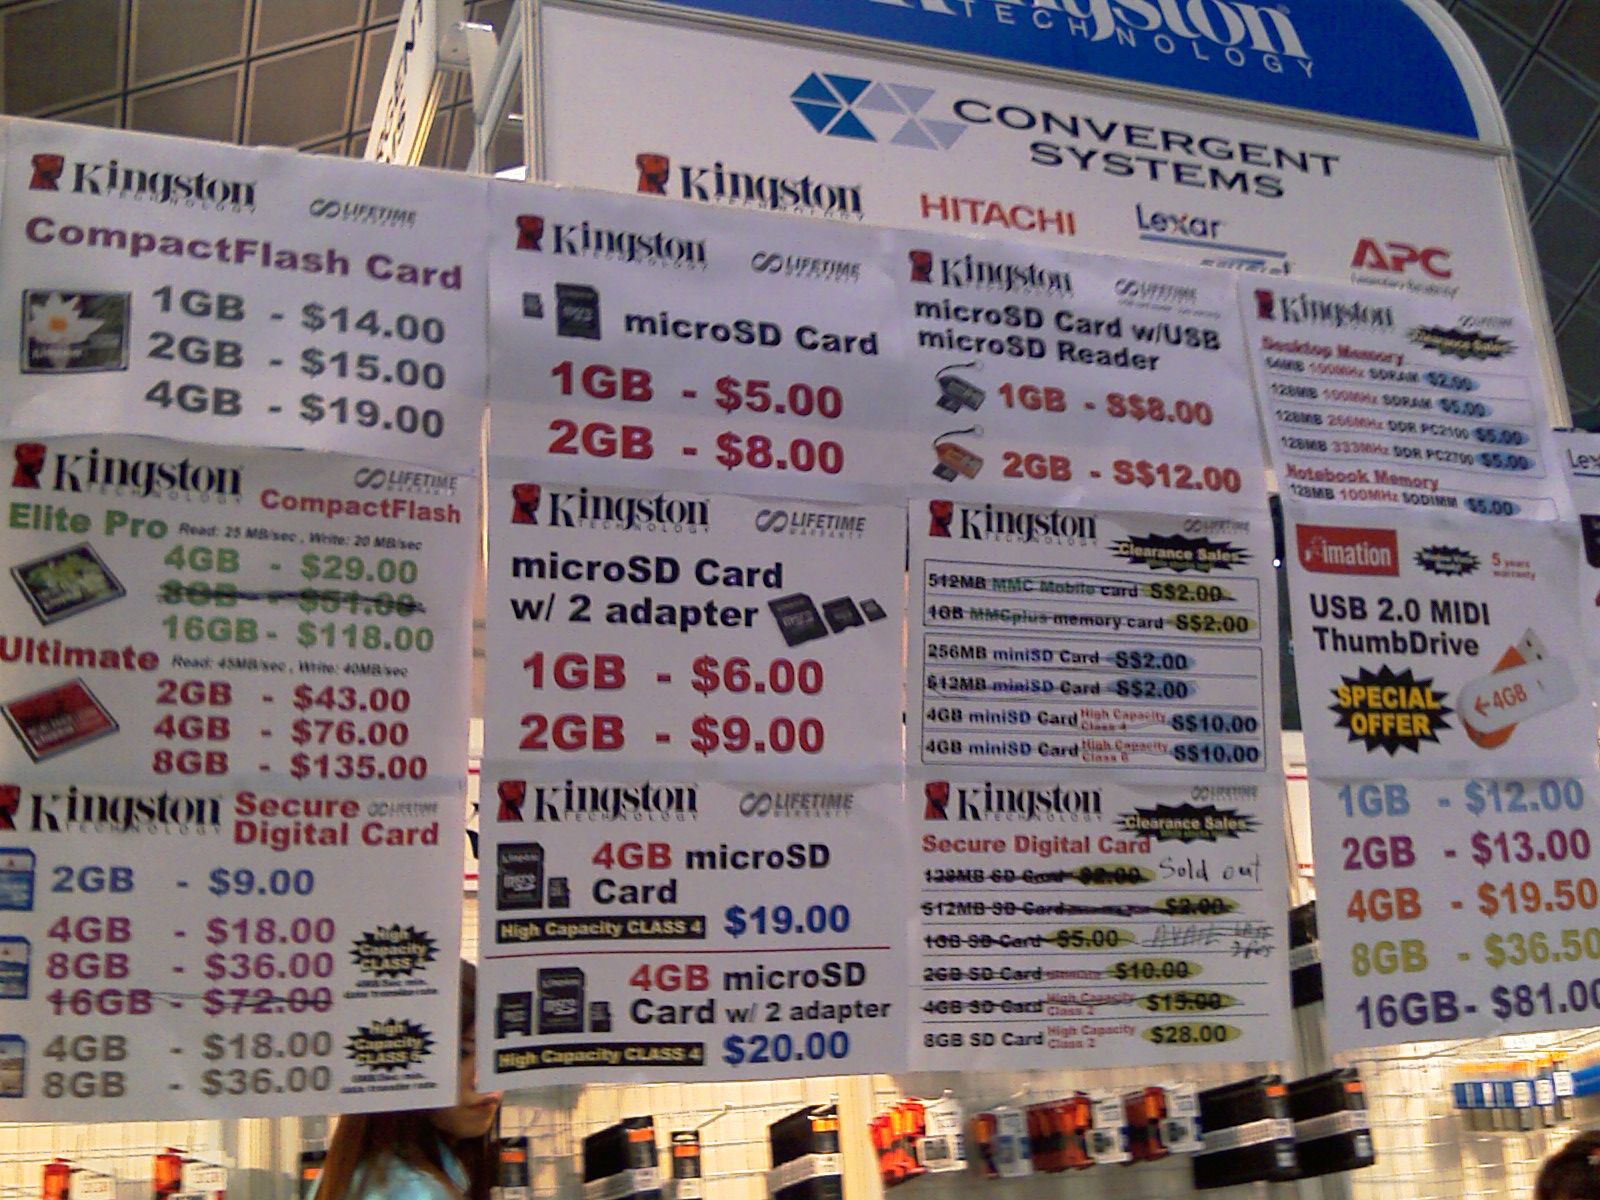 Comex 2008 price list image brochure of Kingston As1